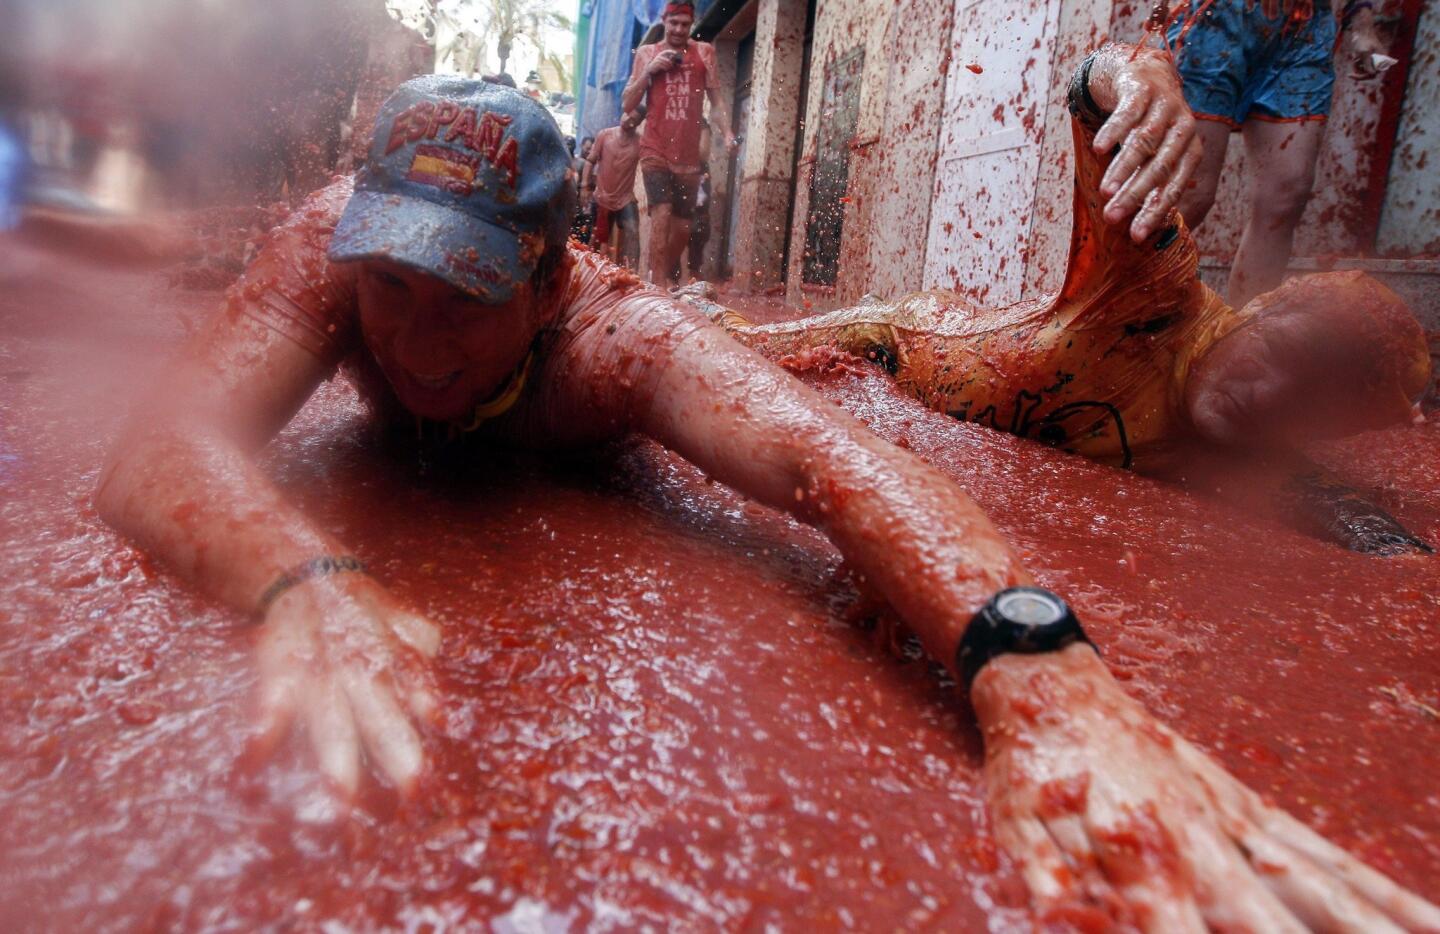 Two men fall to the ground as they participate in the traditional annual tomato fight, known as "Tomatina," in Bunol, Spain, on Aug. 31, 2016.